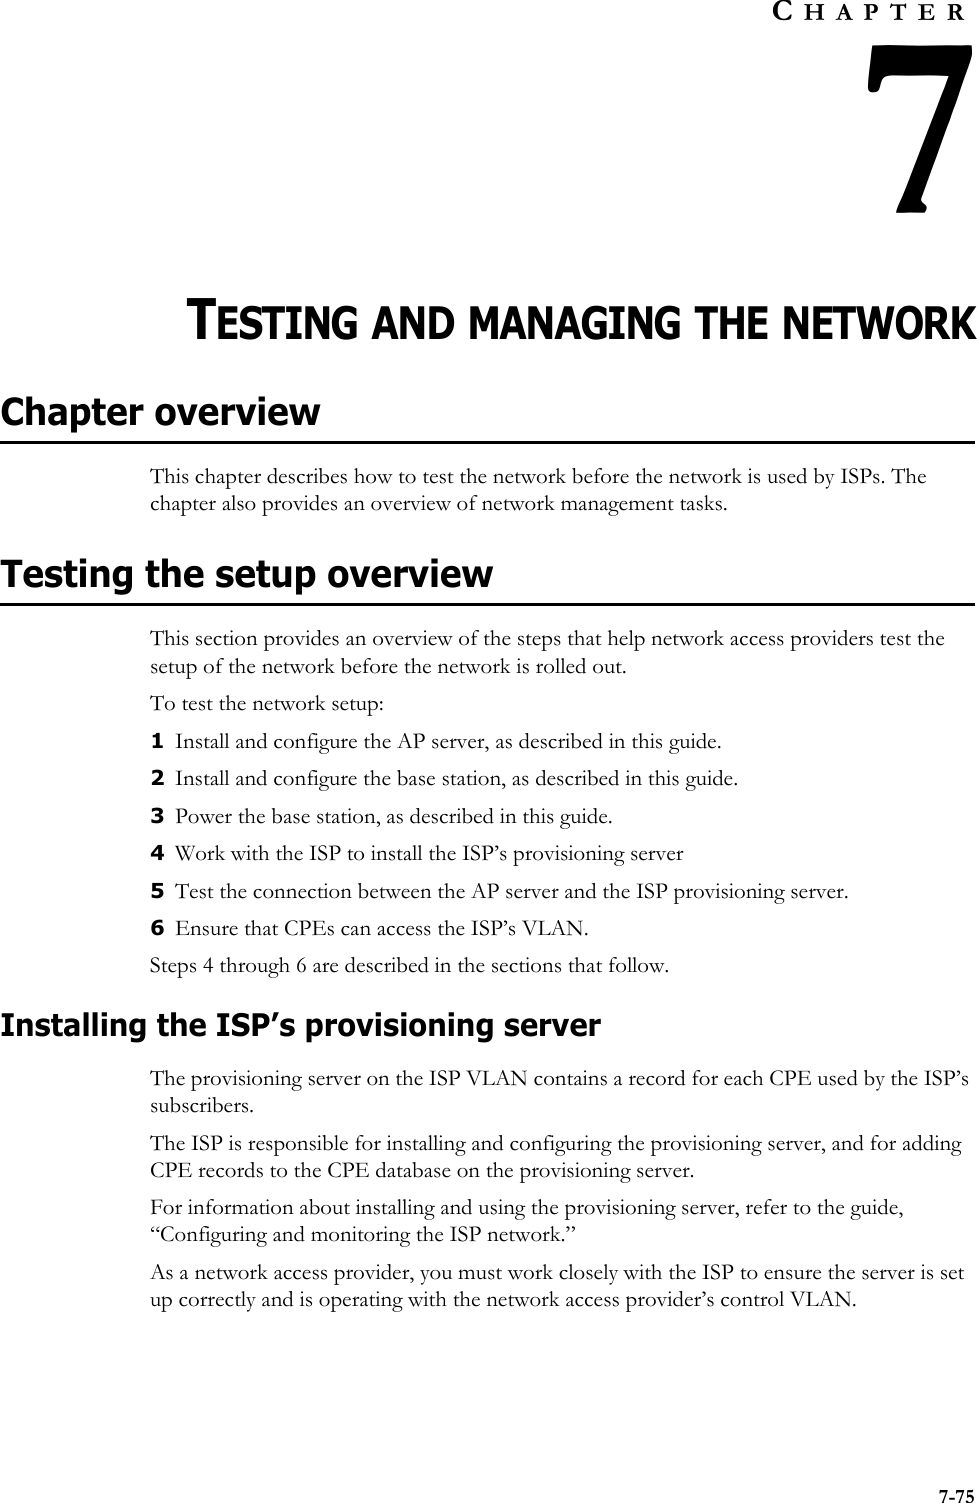 7-75CHAPTER7TESTING AND MANAGING THE NETWORKChapter overviewThis chapter describes how to test the network before the network is used by ISPs. The chapter also provides an overview of network management tasks. Testing the setup overviewThis section provides an overview of the steps that help network access providers test the setup of the network before the network is rolled out.To test the network setup:1Install and configure the AP server, as described in this guide.2Install and configure the base station, as described in this guide.3Power the base station, as described in this guide. 4Work with the ISP to install the ISP’s provisioning server5Test the connection between the AP server and the ISP provisioning server.6Ensure that CPEs can access the ISP’s VLAN.Steps 4 through 6 are described in the sections that follow.Installing the ISP’s provisioning serverThe provisioning server on the ISP VLAN contains a record for each CPE used by the ISP’s subscribers. The ISP is responsible for installing and configuring the provisioning server, and for adding CPE records to the CPE database on the provisioning server. For information about installing and using the provisioning server, refer to the guide, “Configuring and monitoring the ISP network.” As a network access provider, you must work closely with the ISP to ensure the server is set up correctly and is operating with the network access provider’s control VLAN.